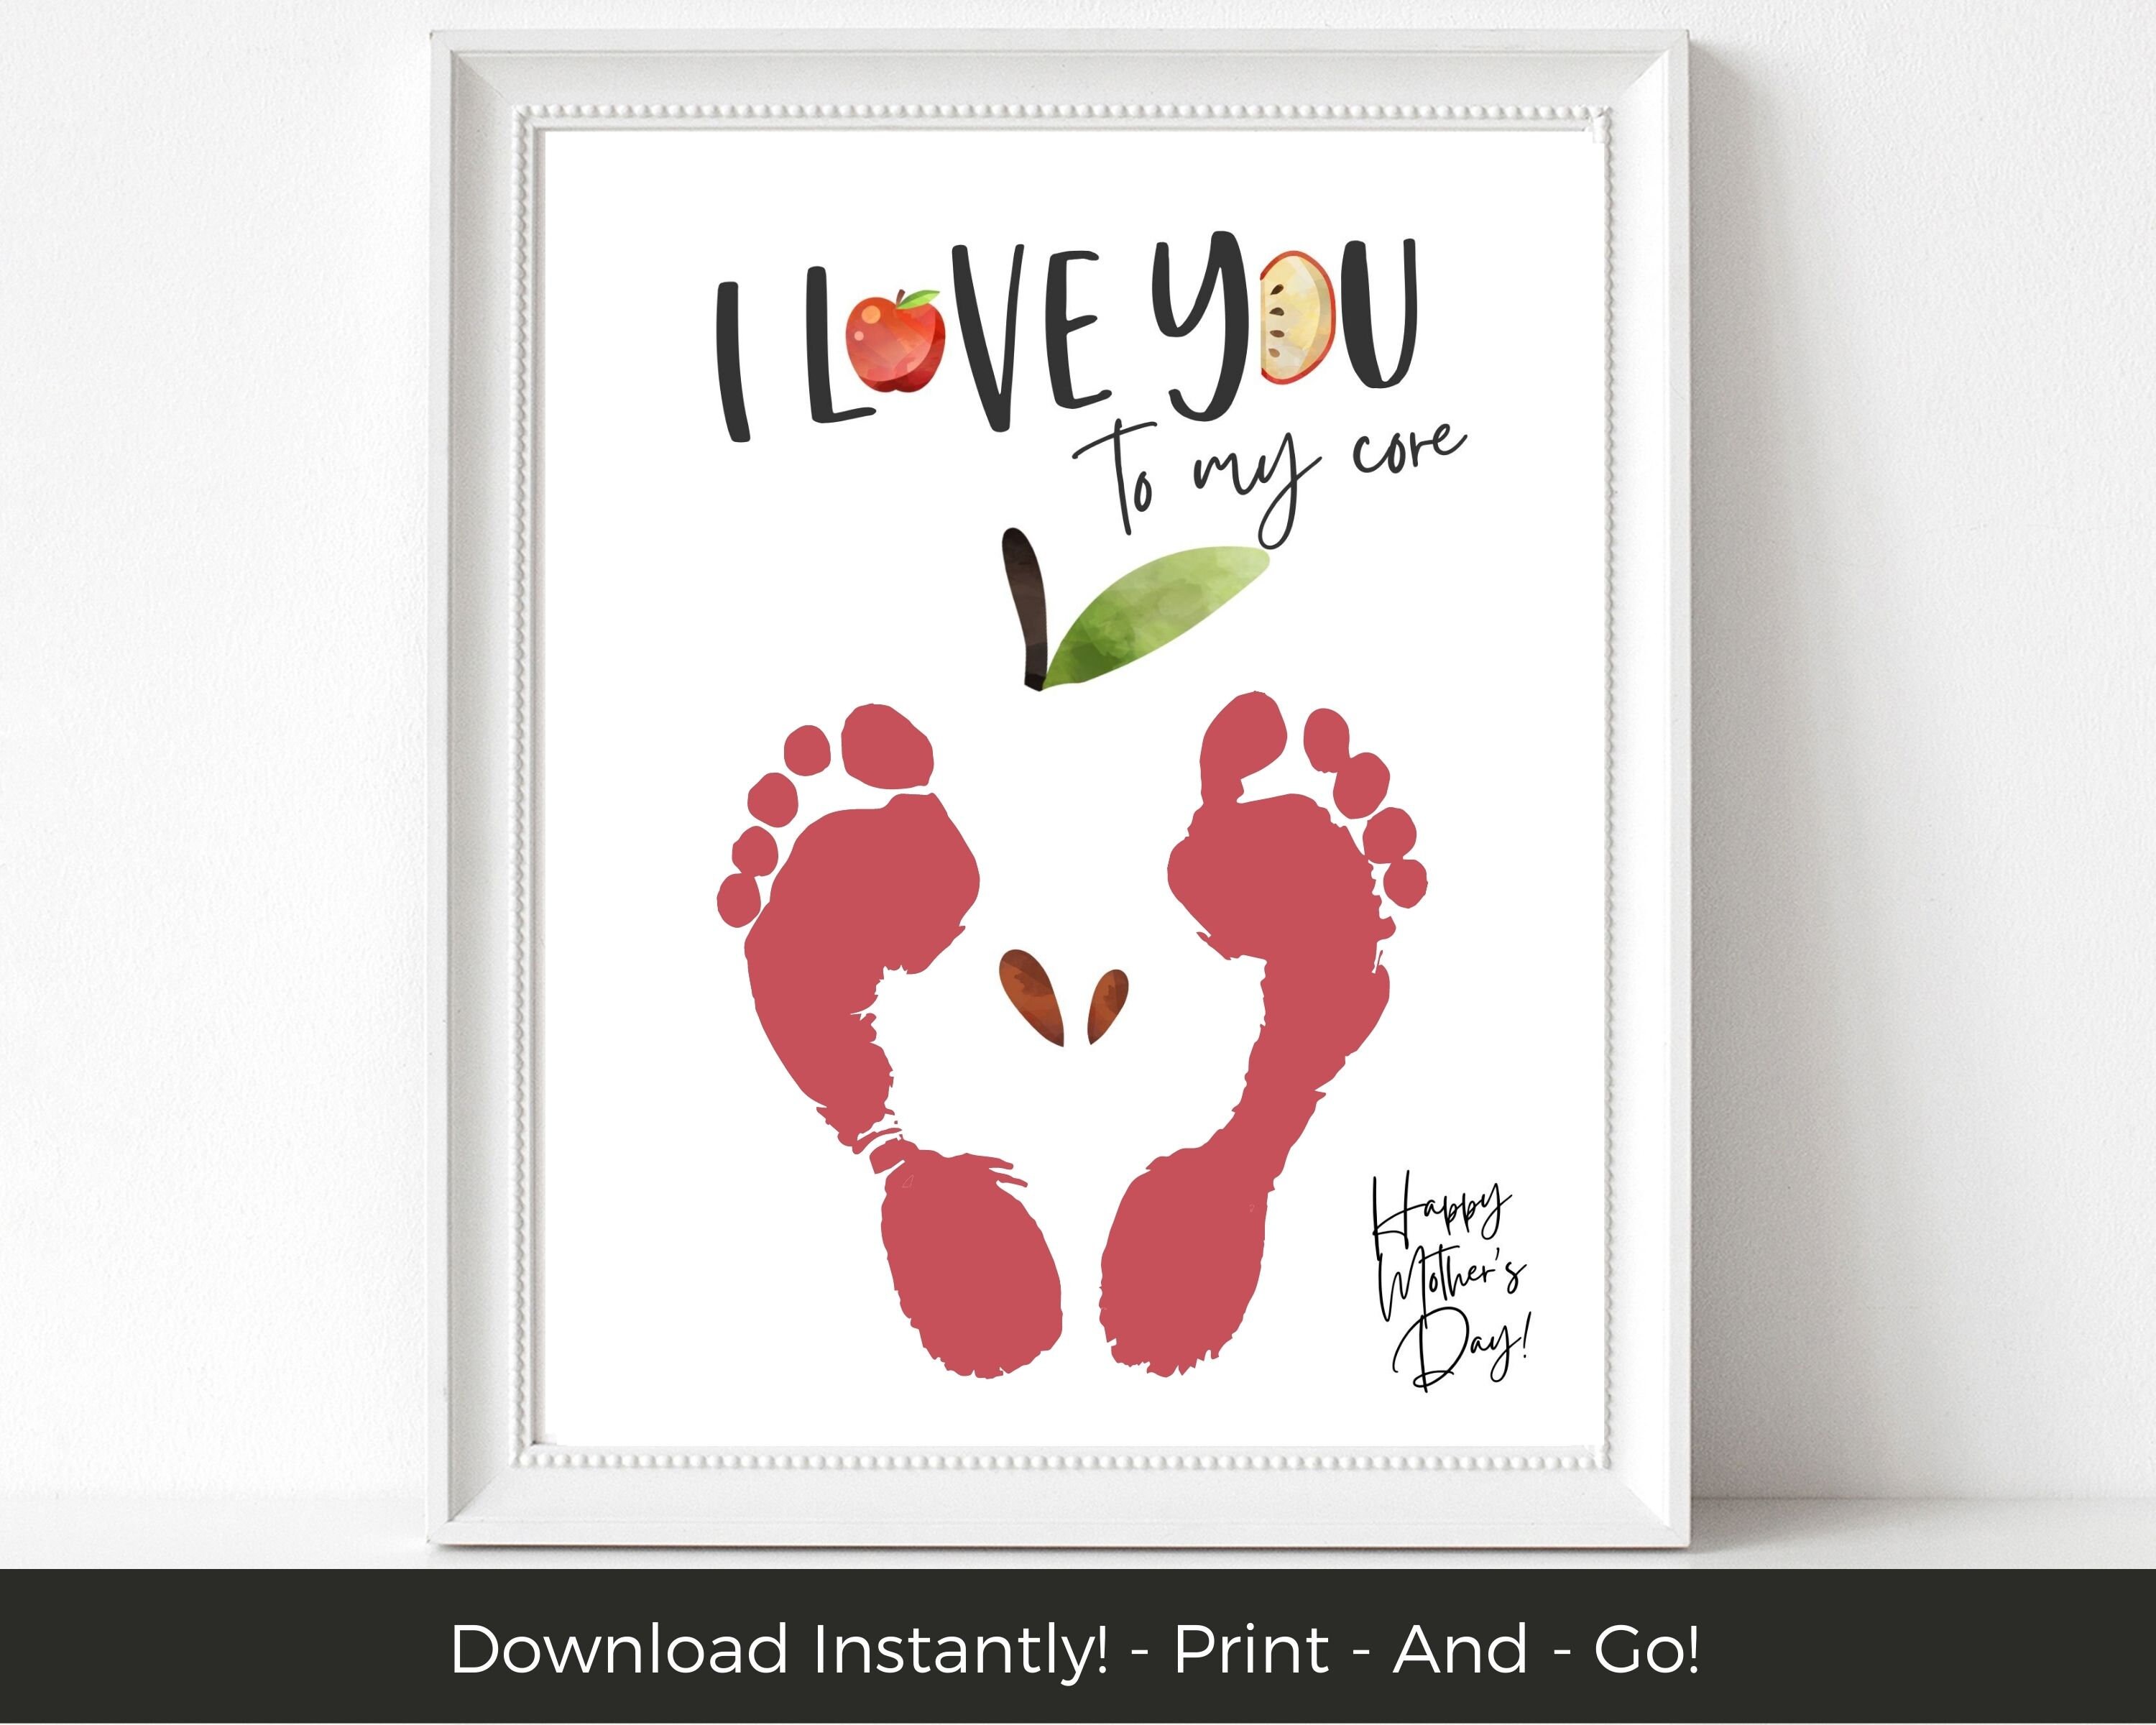 Mother's Day Art Gifts, Stuff We Love